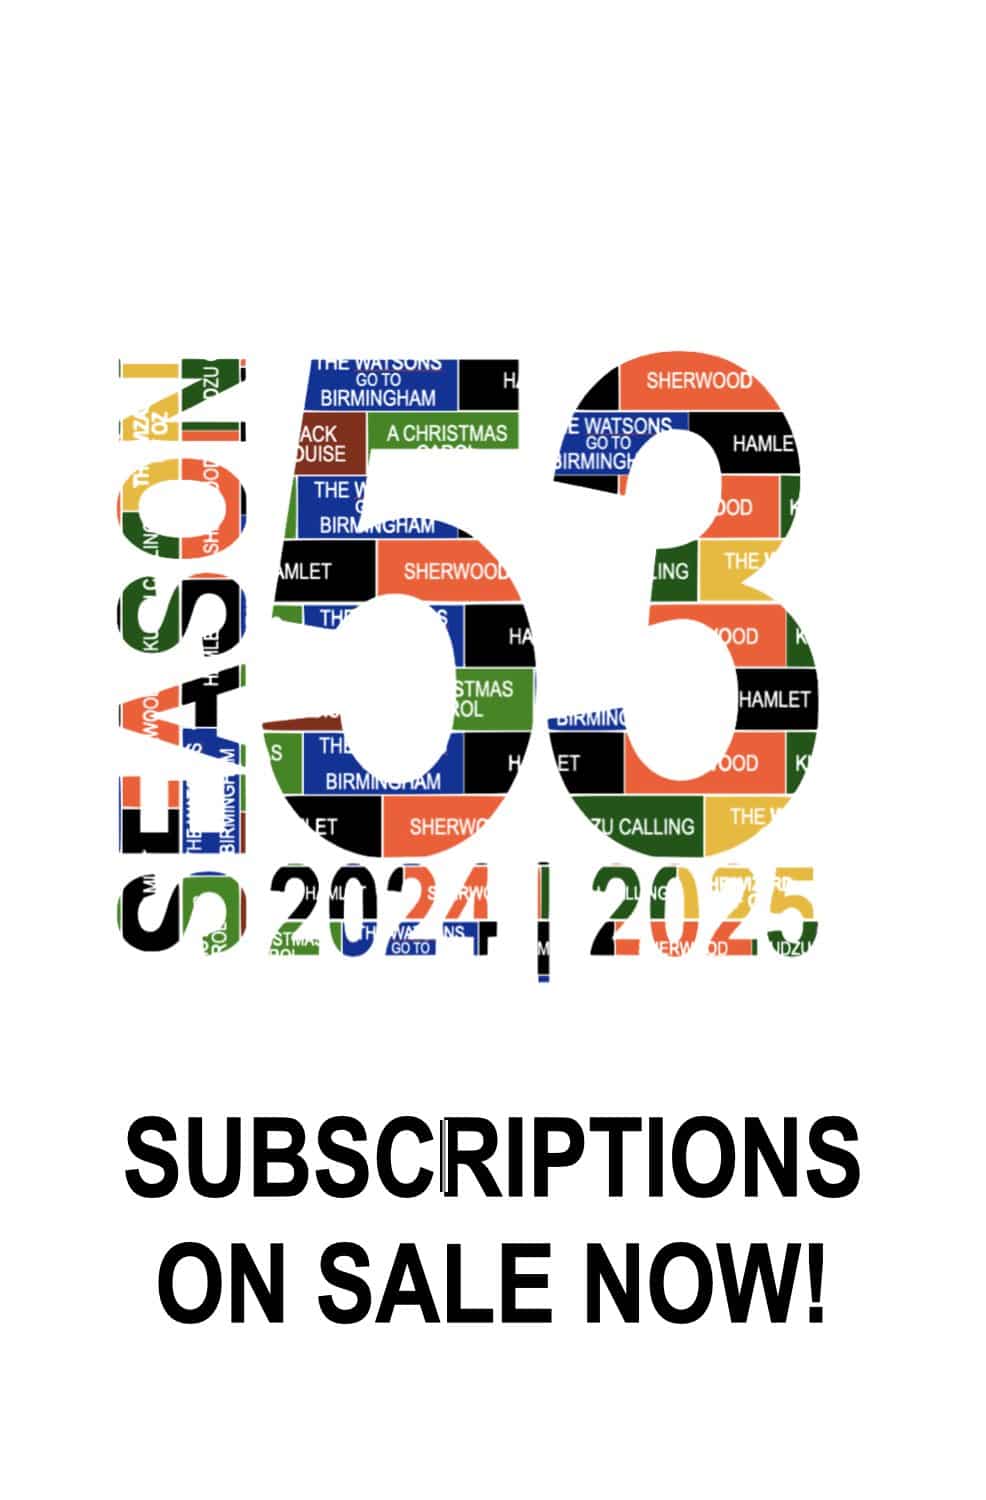 Season 53 graphic - subscriptions on sale - links to subscriptions page. 